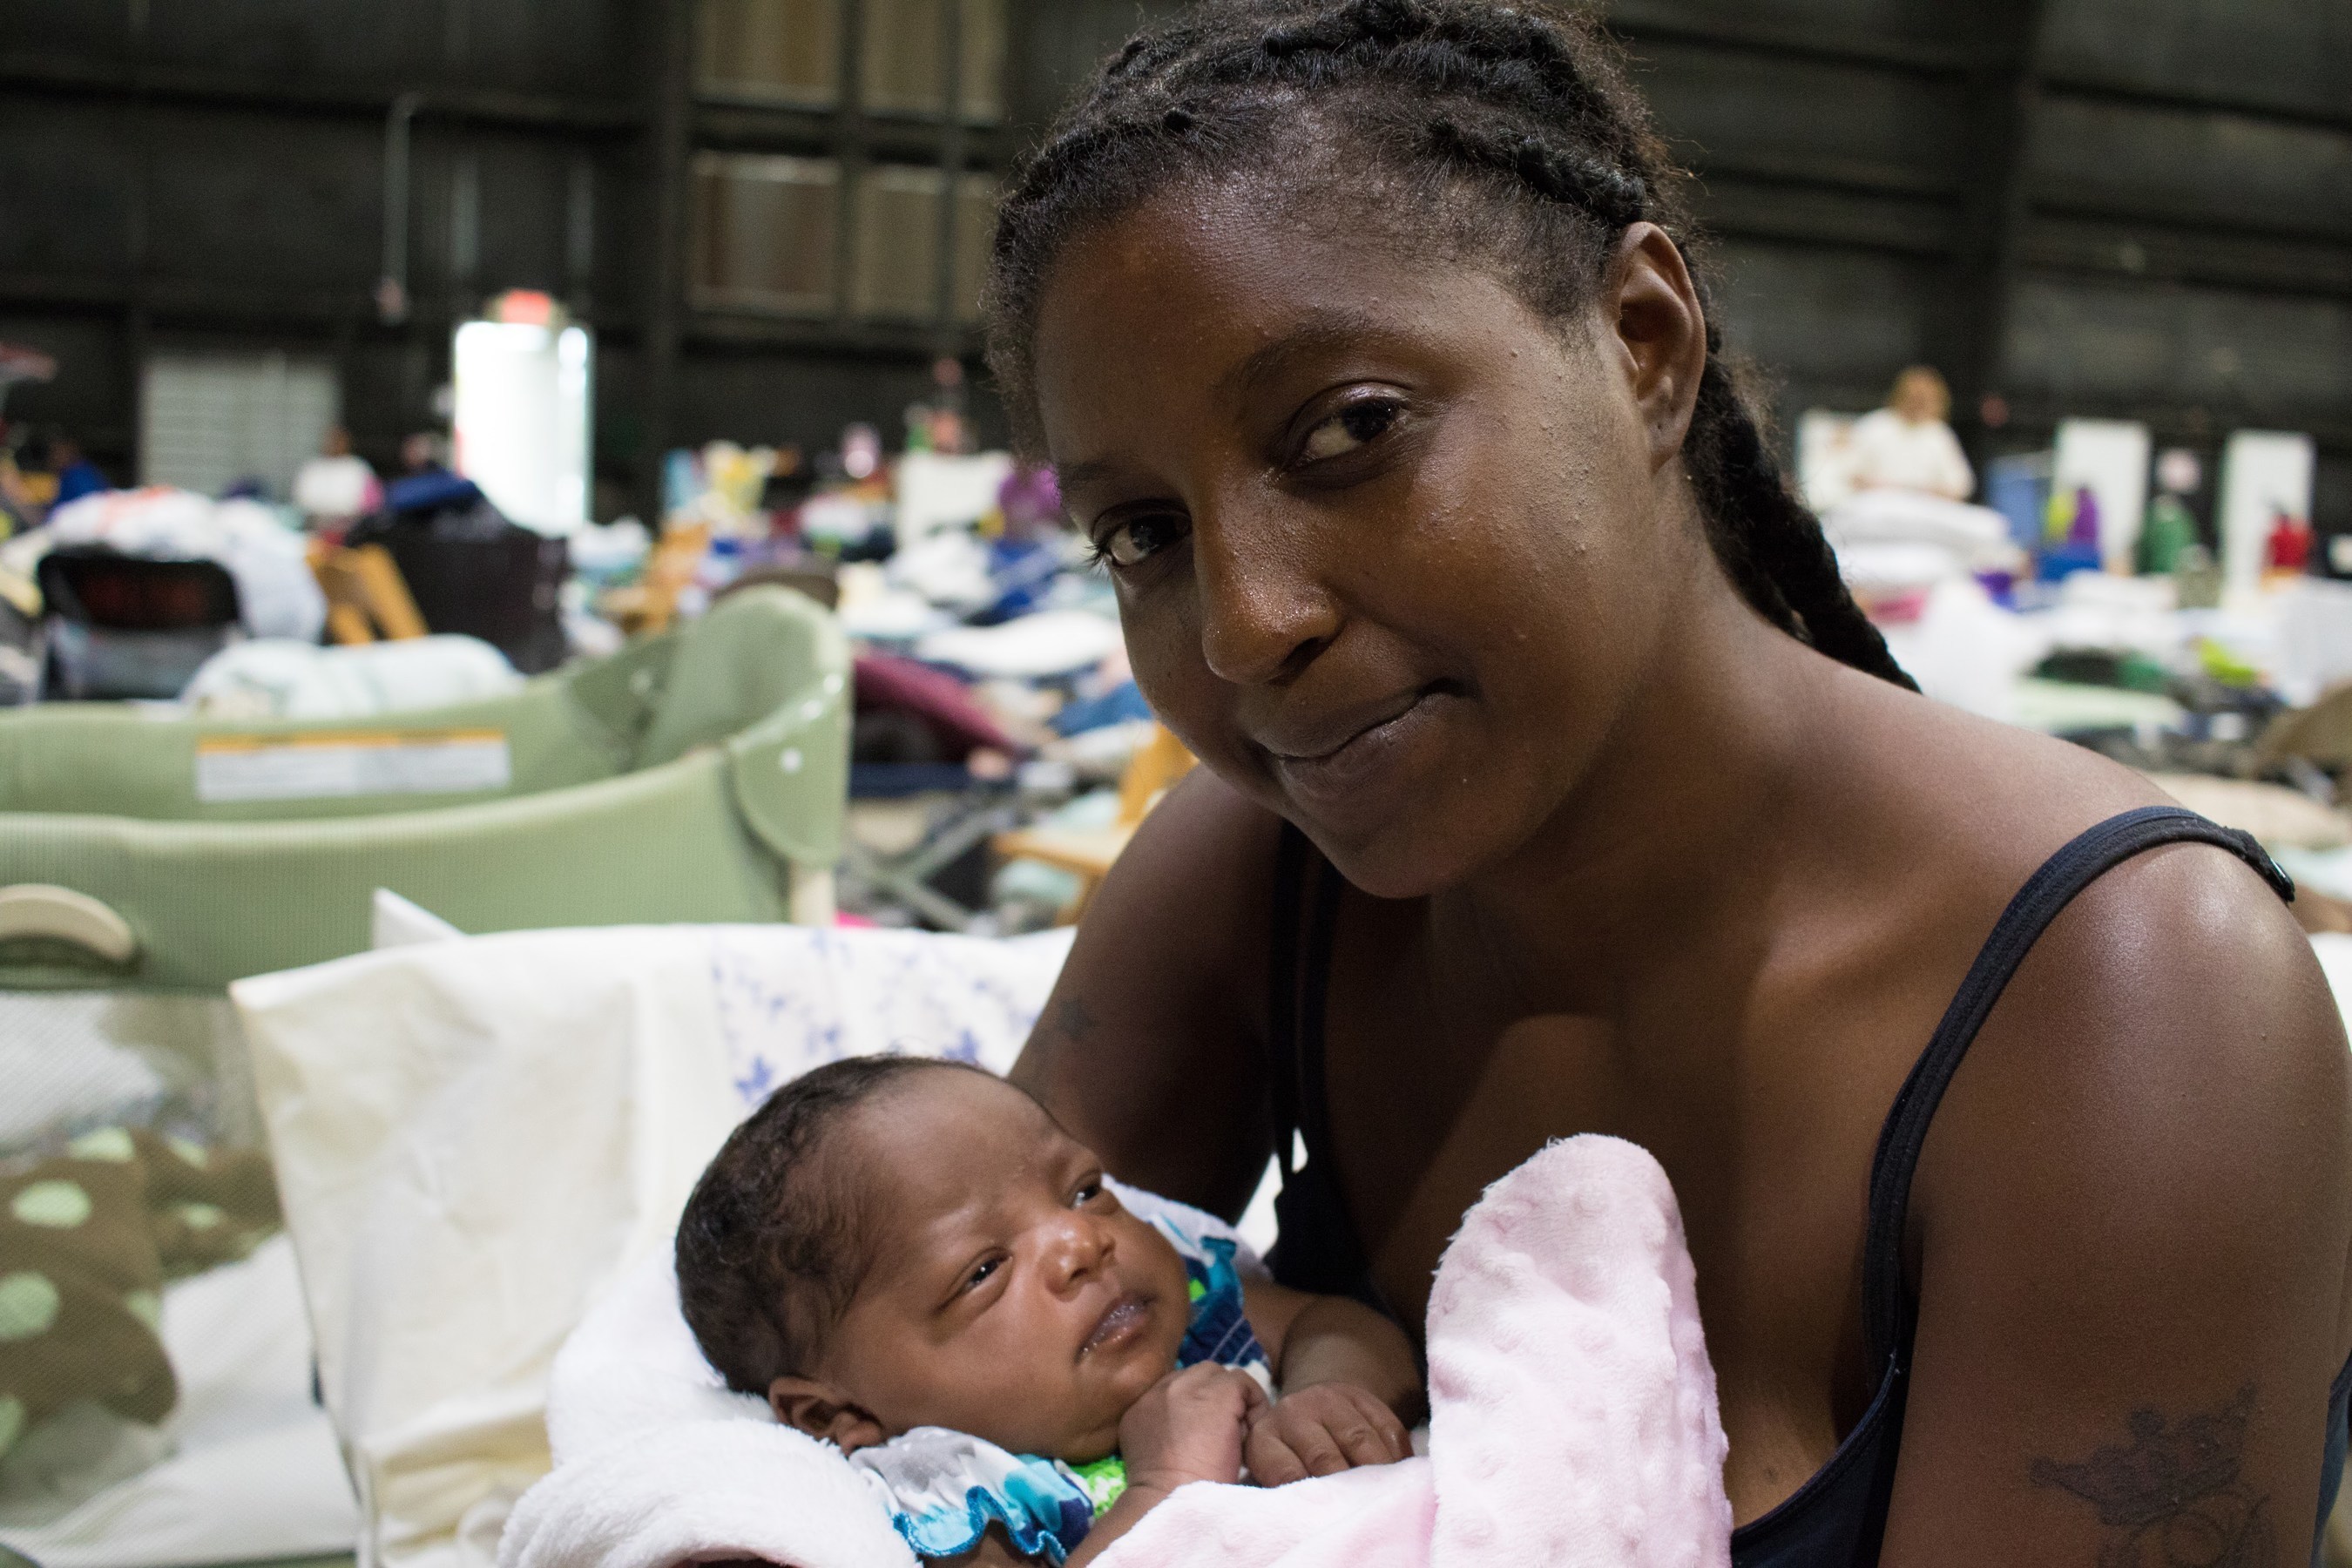 Vernesha and her 3-week-old baby niece, Joy, are staying at a shelter in Baton Rouge after being driven from their home by rising floodwaters on Saturday, Aug. 13. They live together with Joy's mother and two older sisters in an apartment that is now underwater. Photo by Stuart Sia / Save the Children.